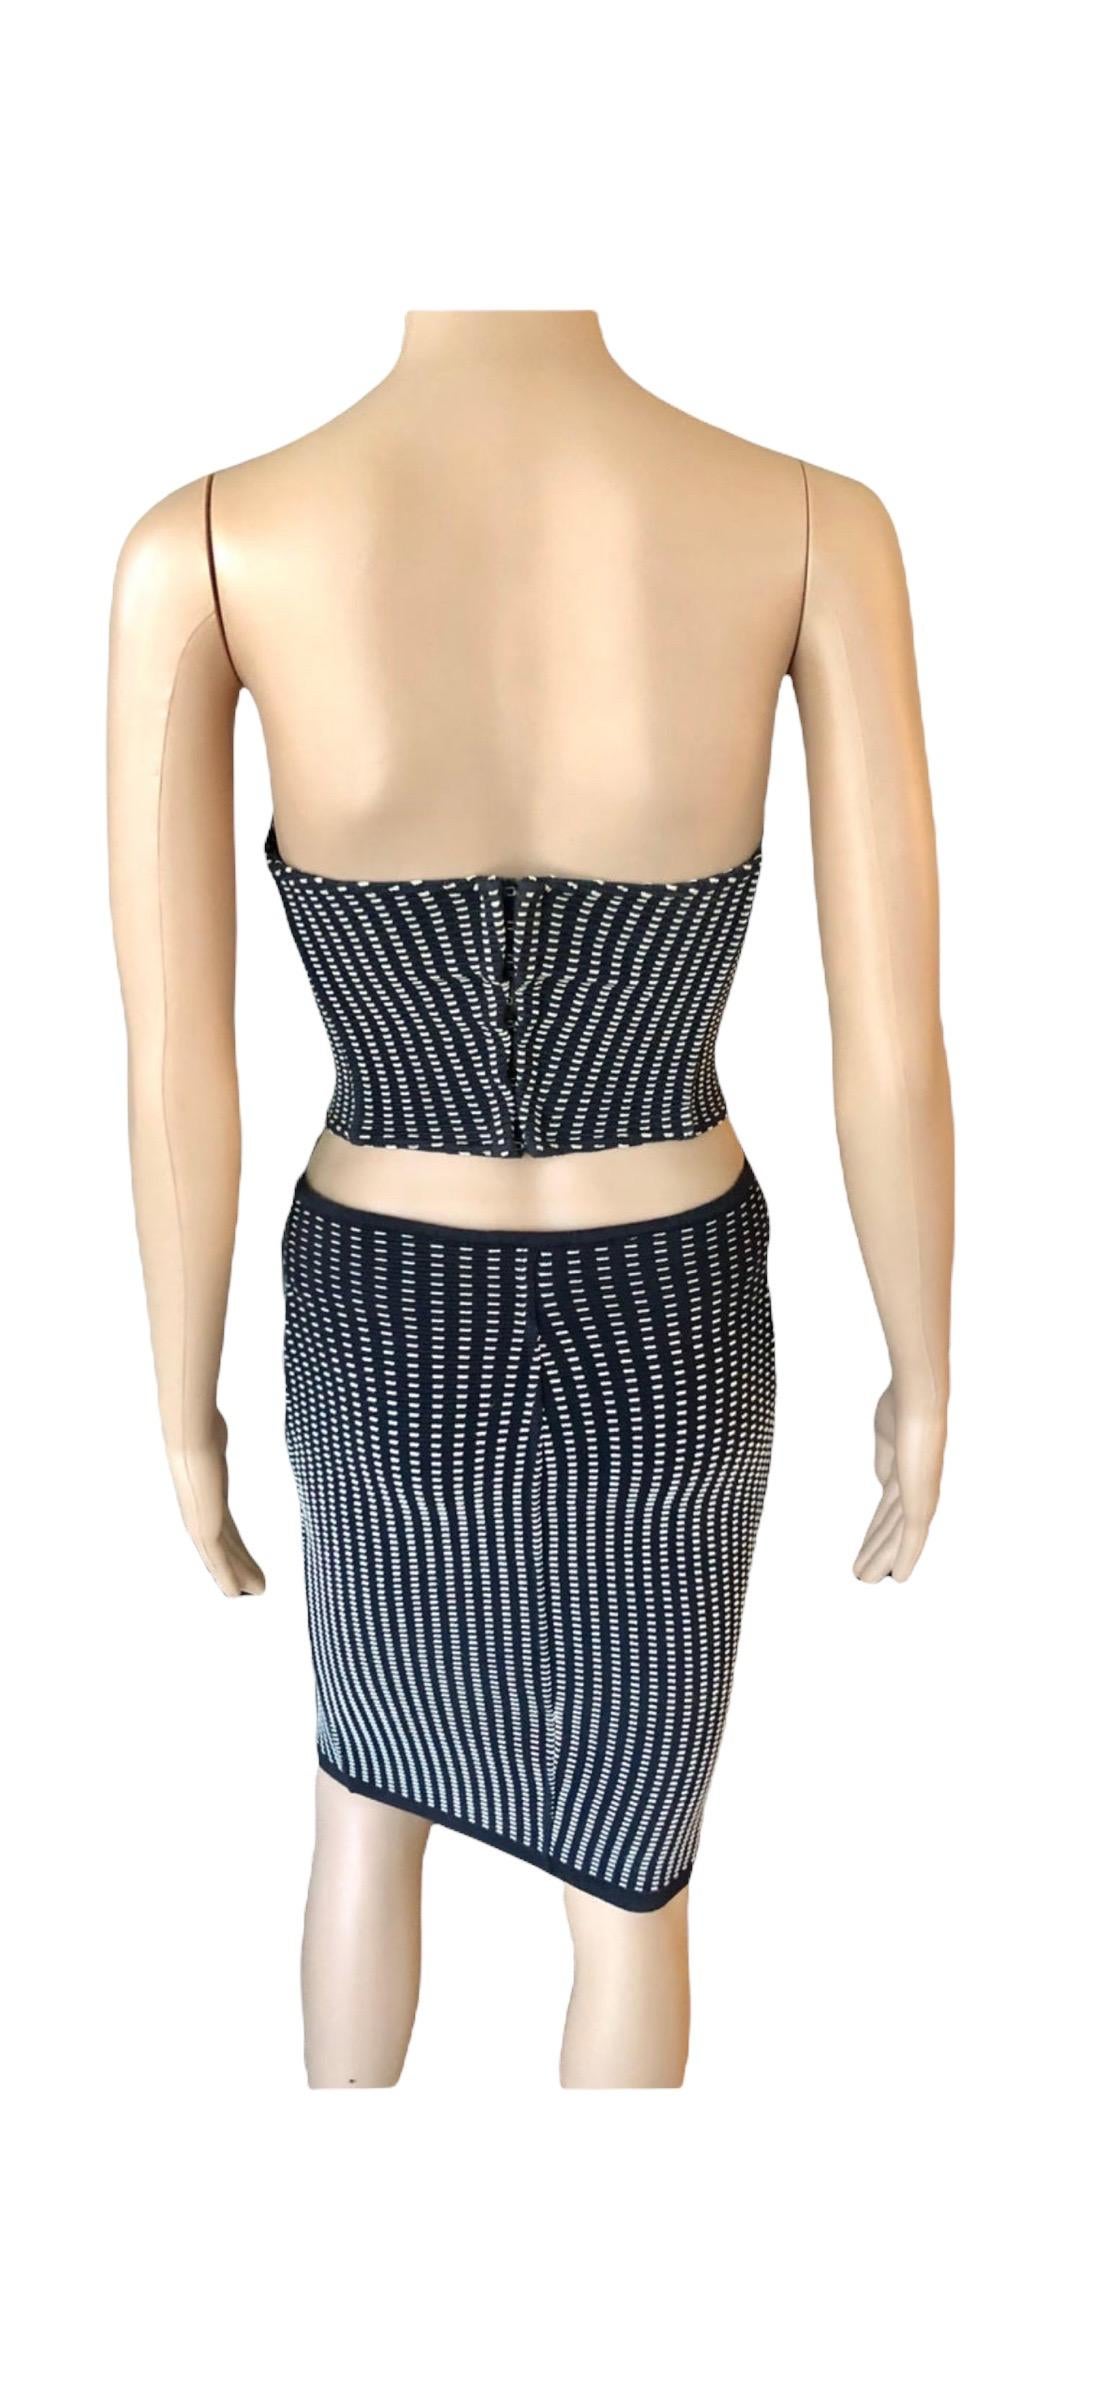 Azzedine Alaia S/S 1991 Vintage Skirt and Bustier Crop Top 2 Piece Set  10